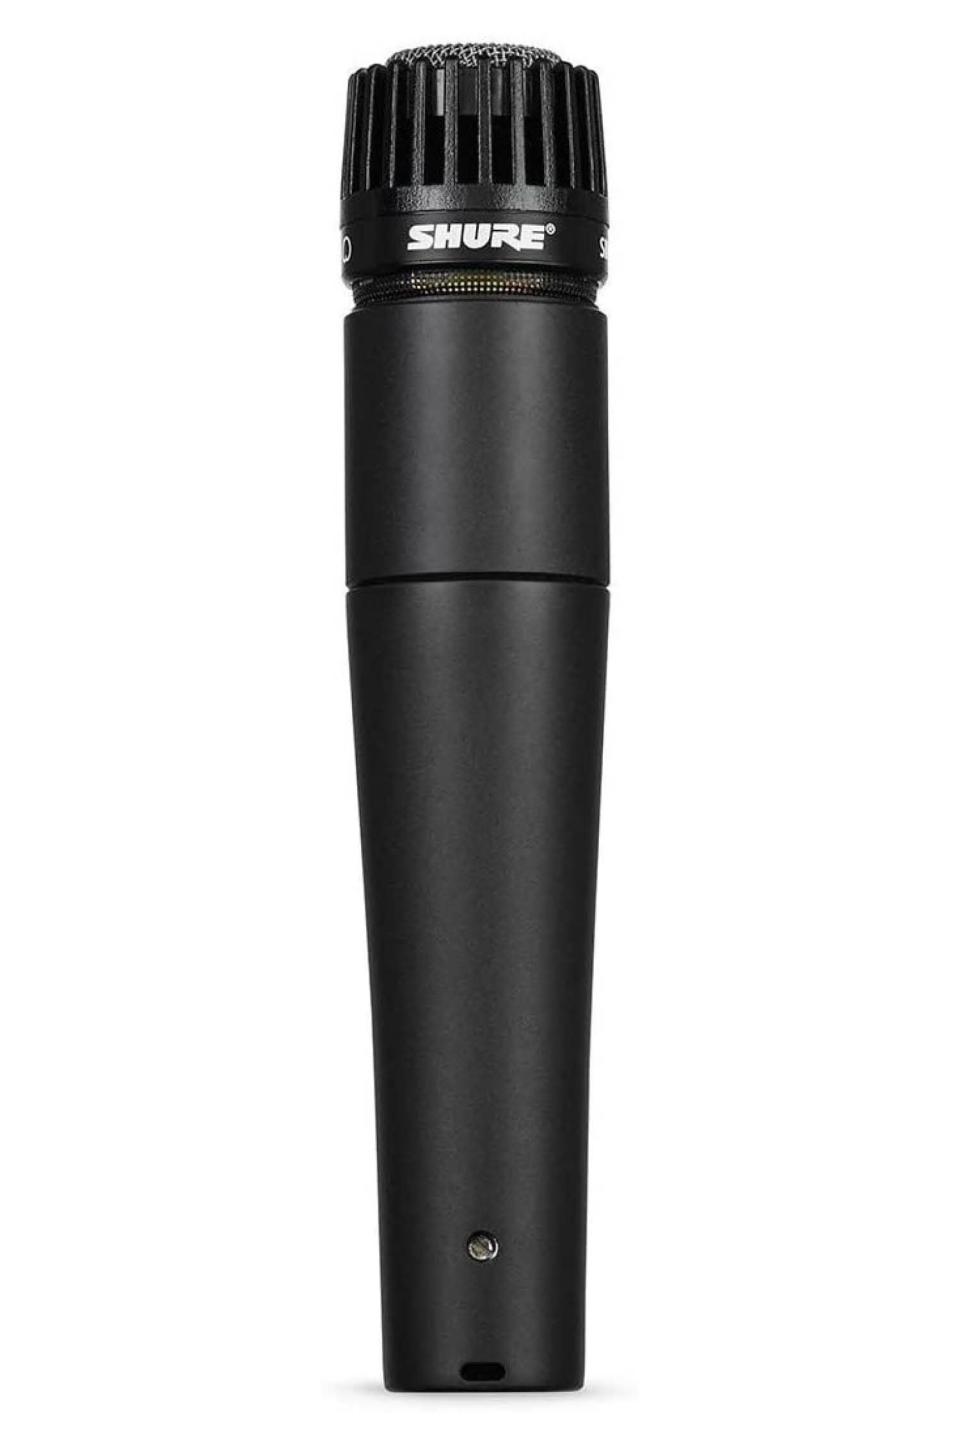 5) Shure SM57-LC Microphone